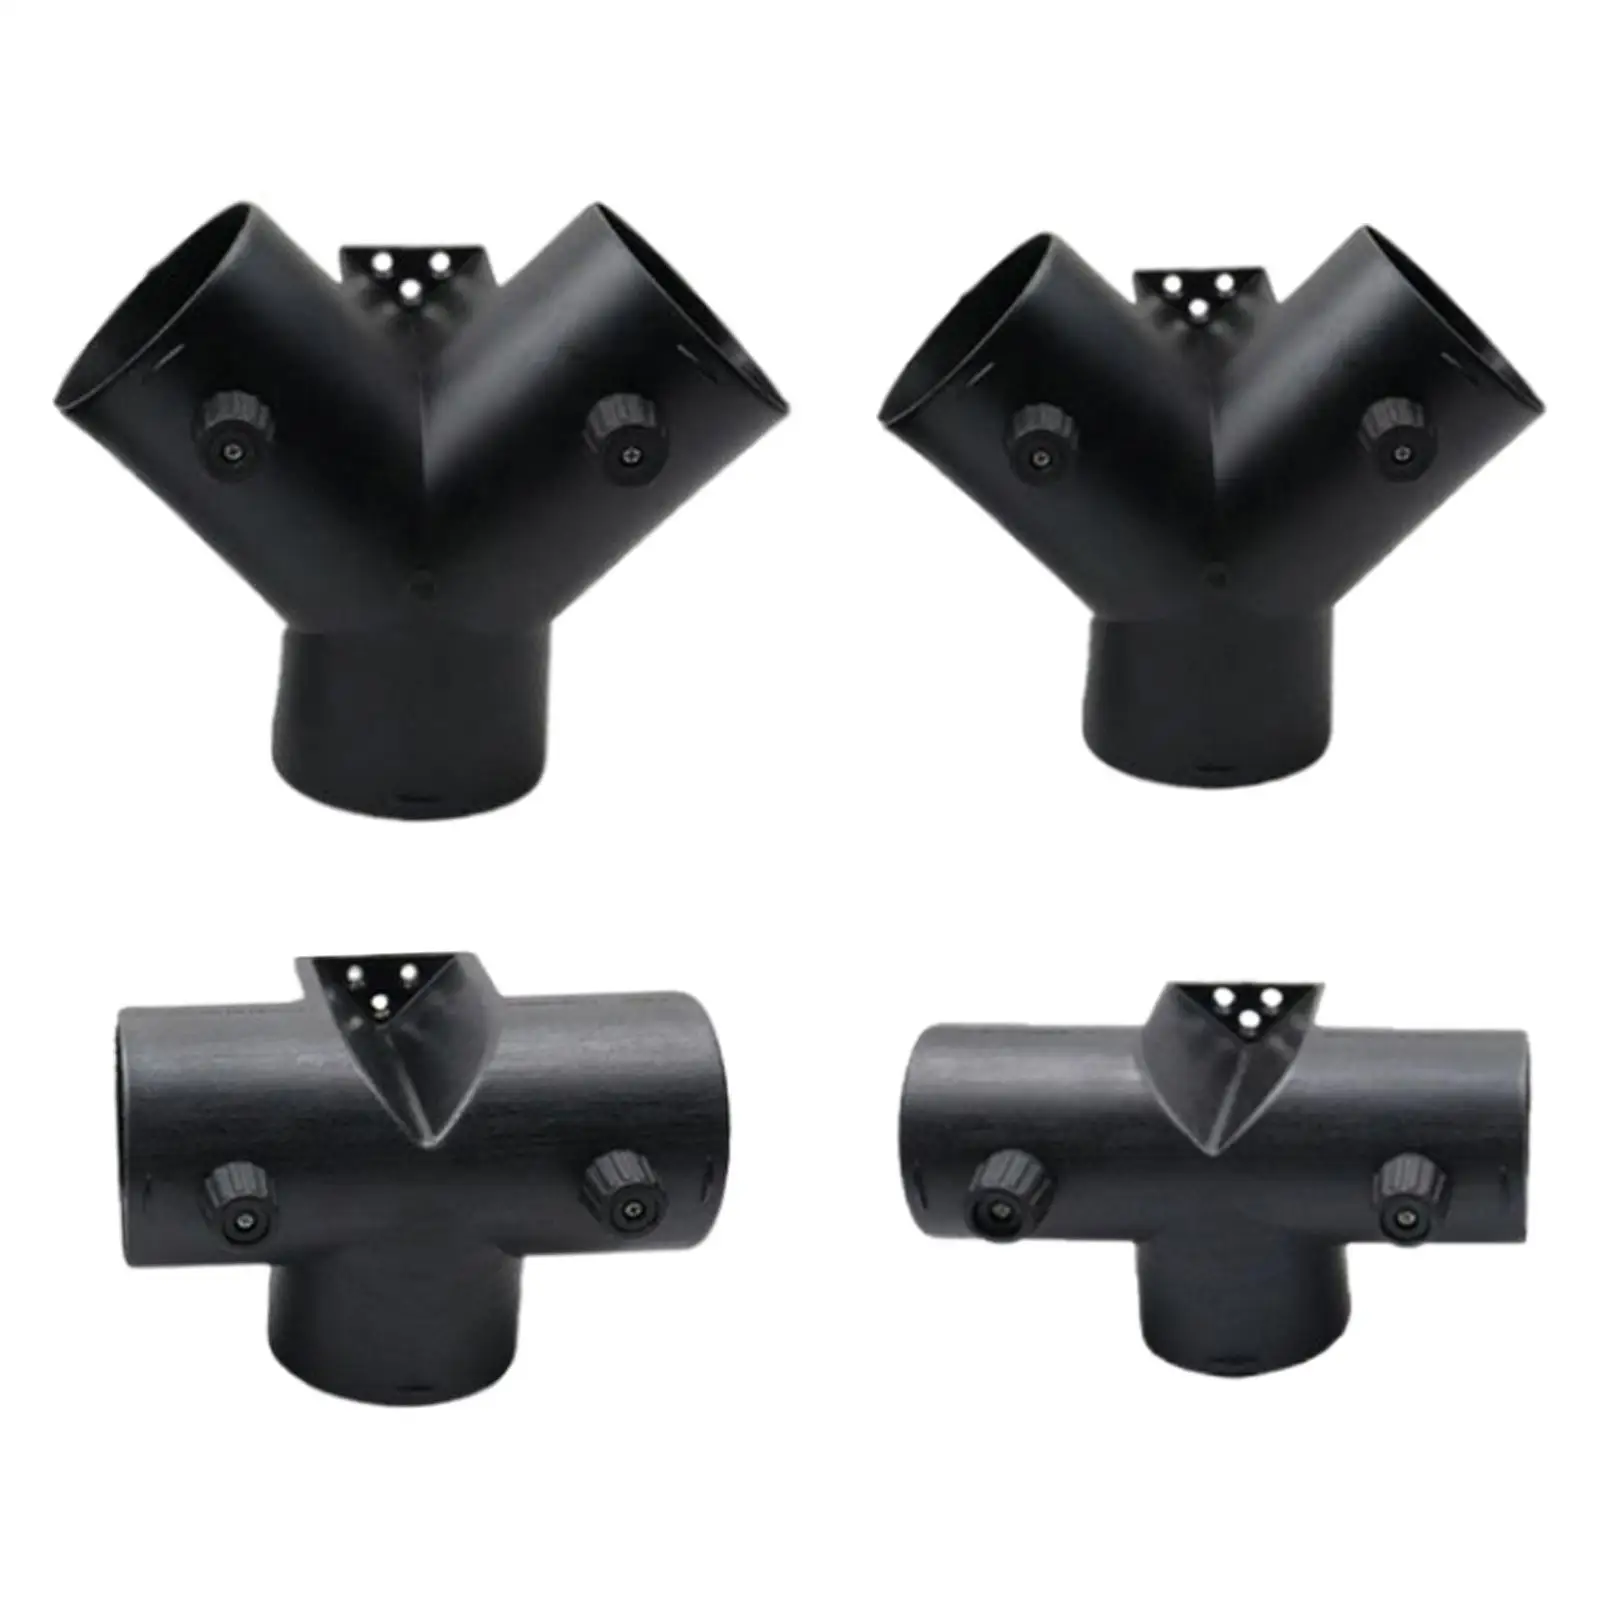  Ducting Exhaust Connector Car Air Conditioning Vent Ducting Splitter for Parking Heater Core Fittings, , Black